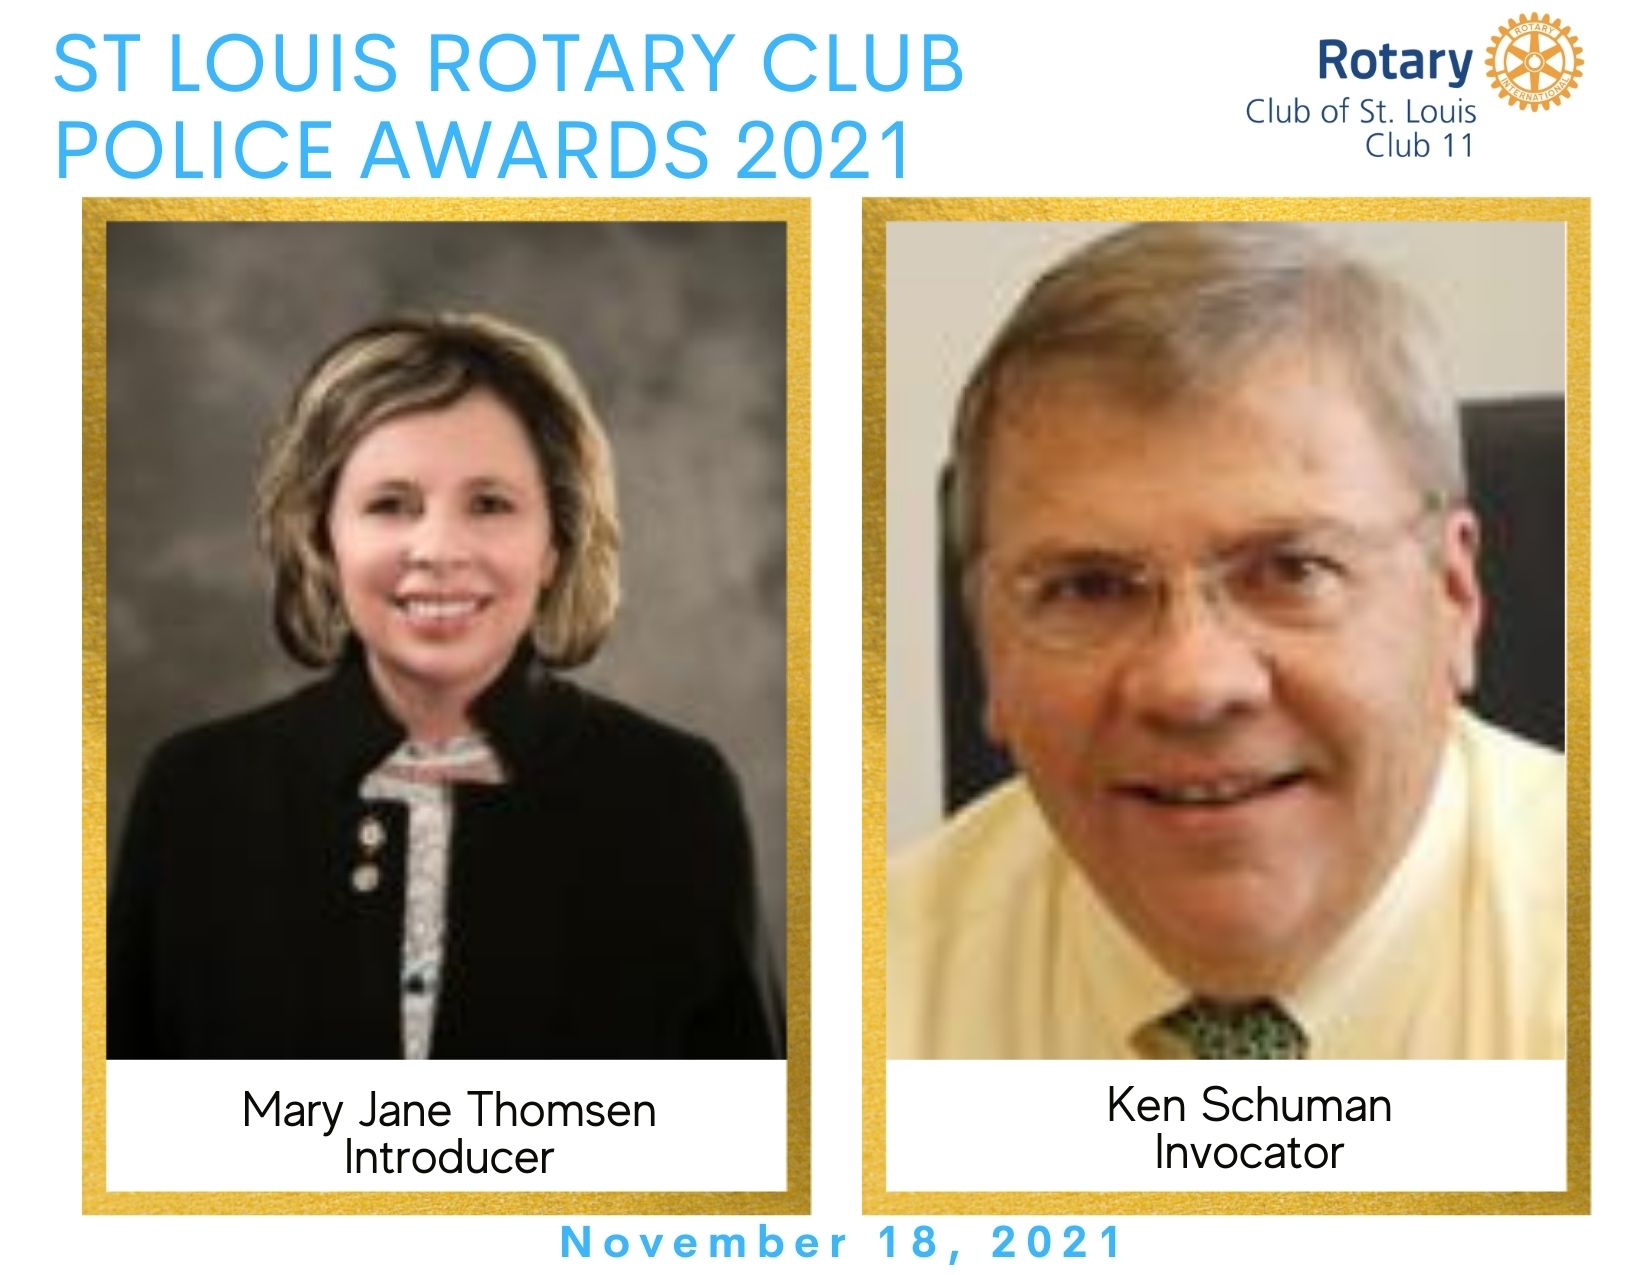 MJ Thomsen, Introducer and Ken Schuman, Invocator 11-18-21 at St. Louis Rotary Club Police Awards 2021